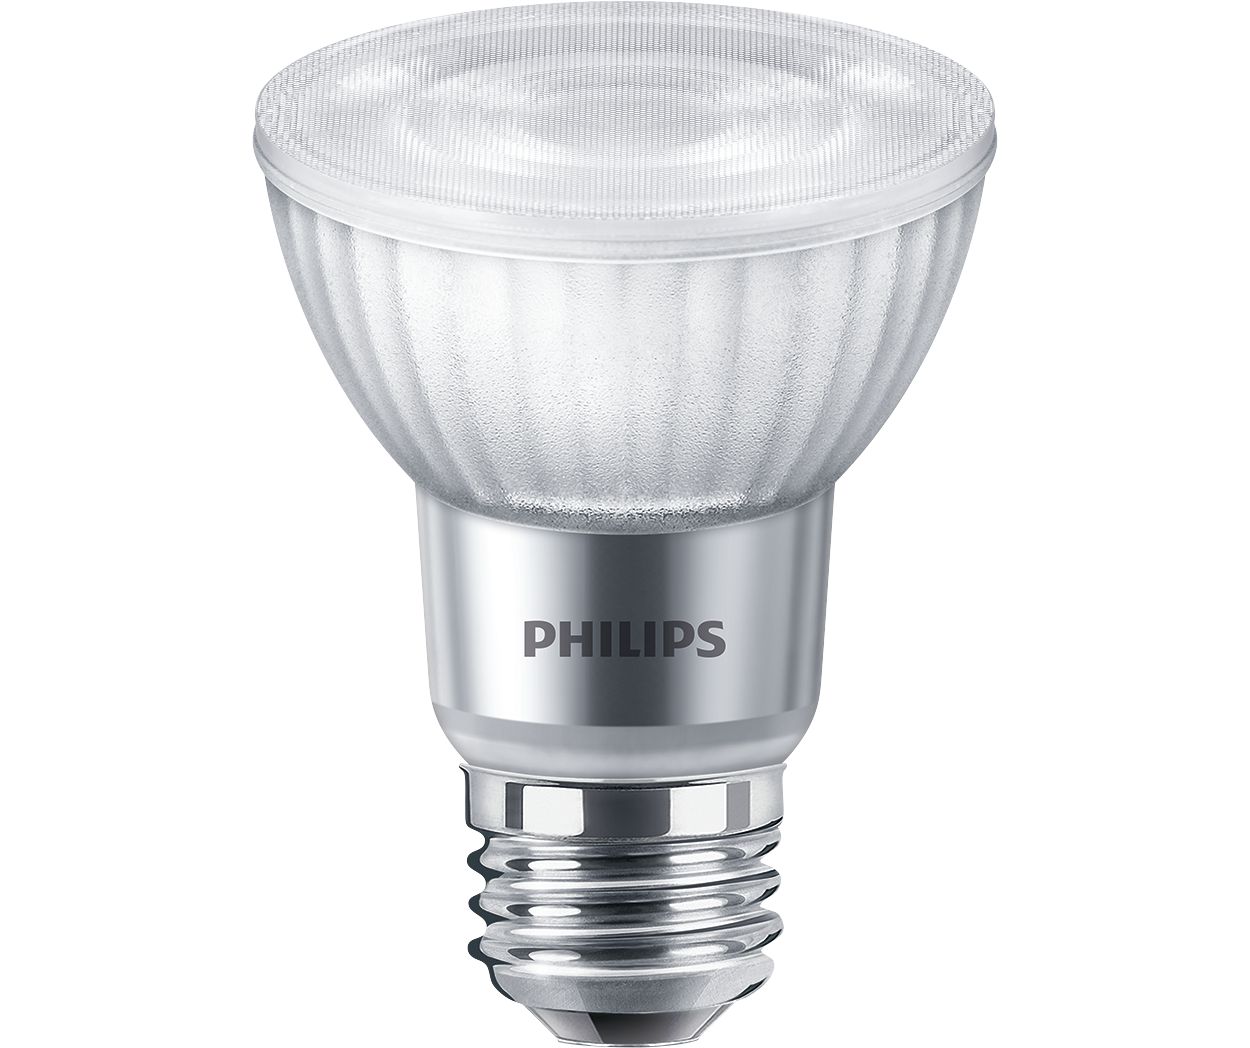 Dimmable LED spot with excellent light, the more you dim, the warmer the light